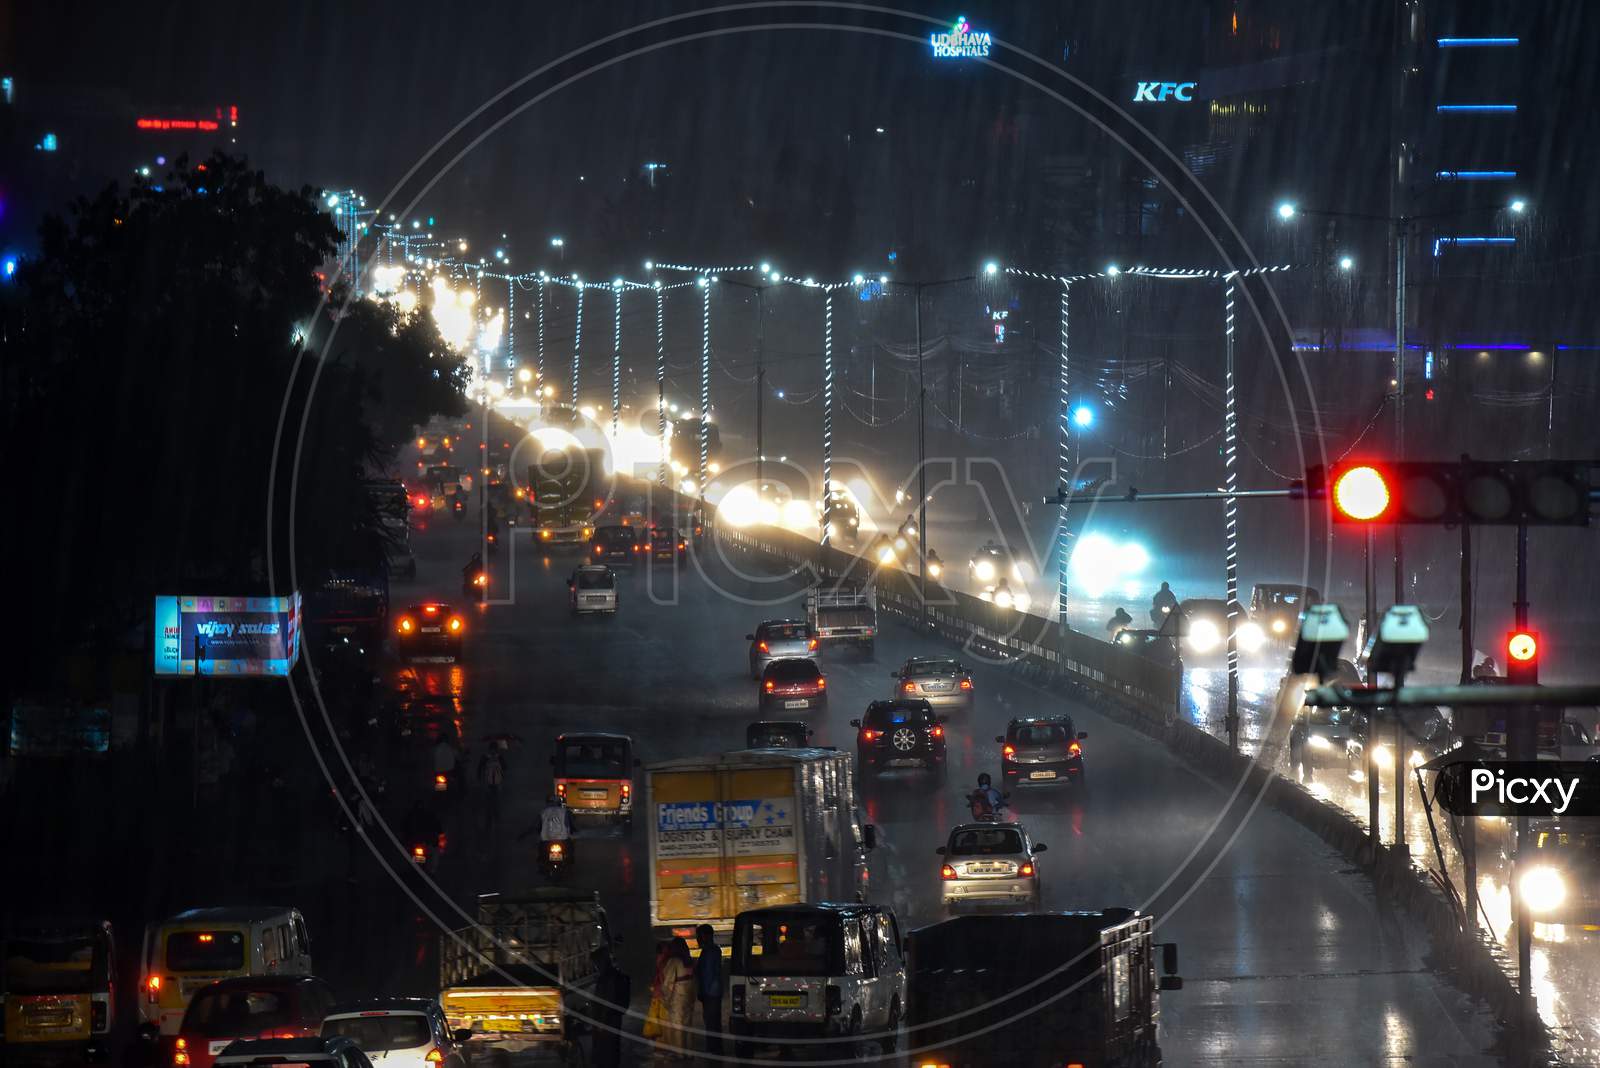 vehicles ply on road as it rains heavily in Hyderabad, September 16, 2020.